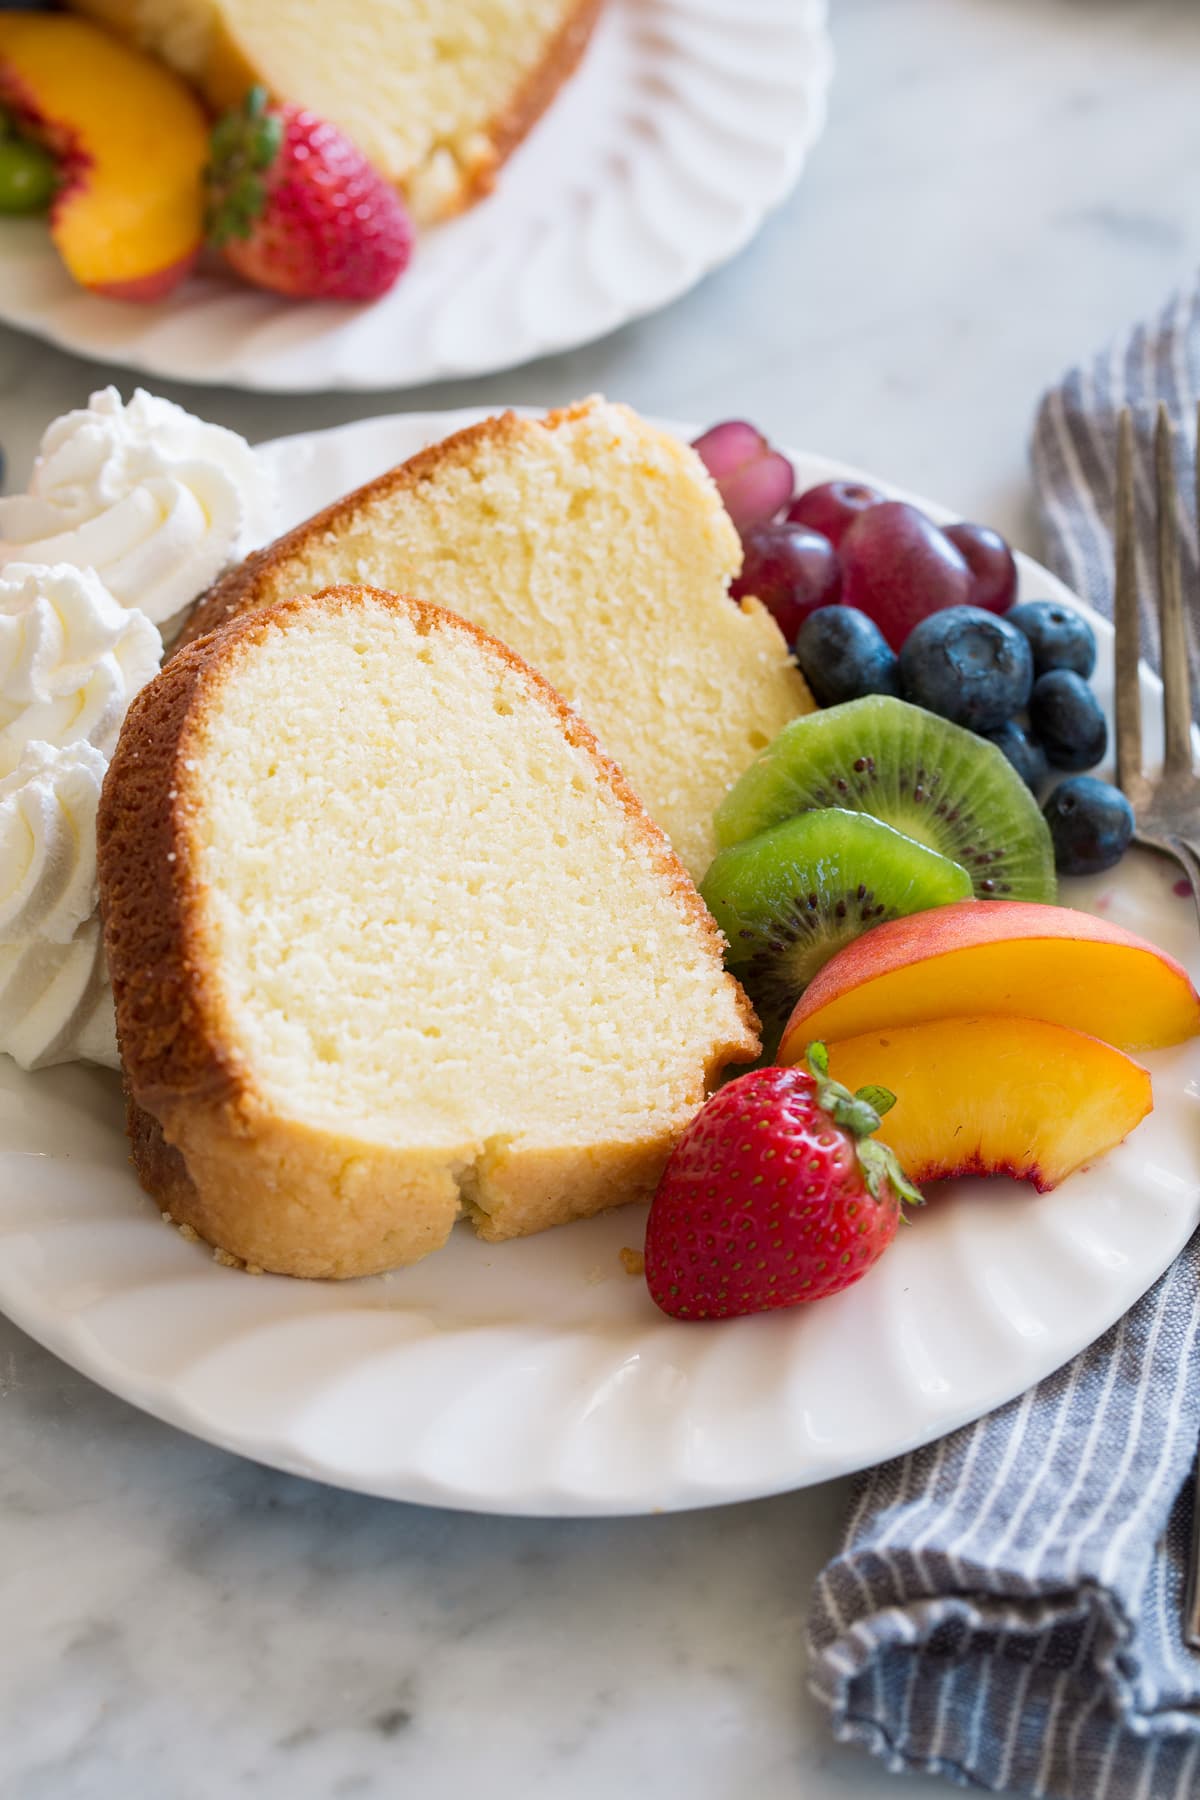 Best Pound Cake Recipe with Topping Ideas - Cooking Classy.